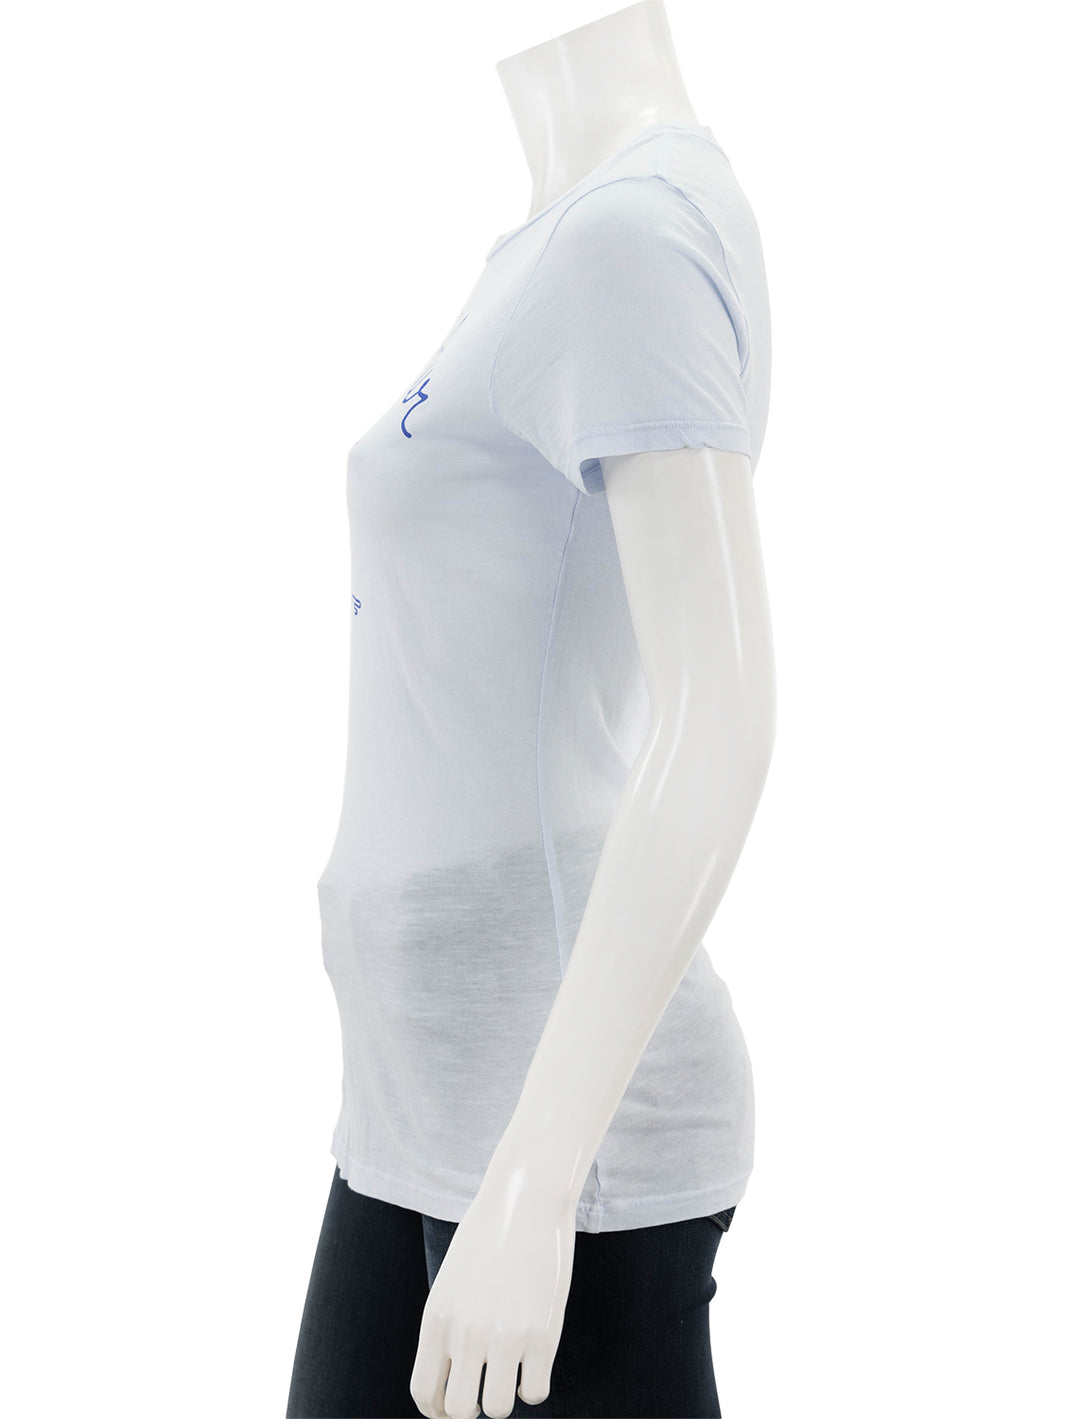 Side view of Sundry's cote d'azur boy tee in pigment skylight.